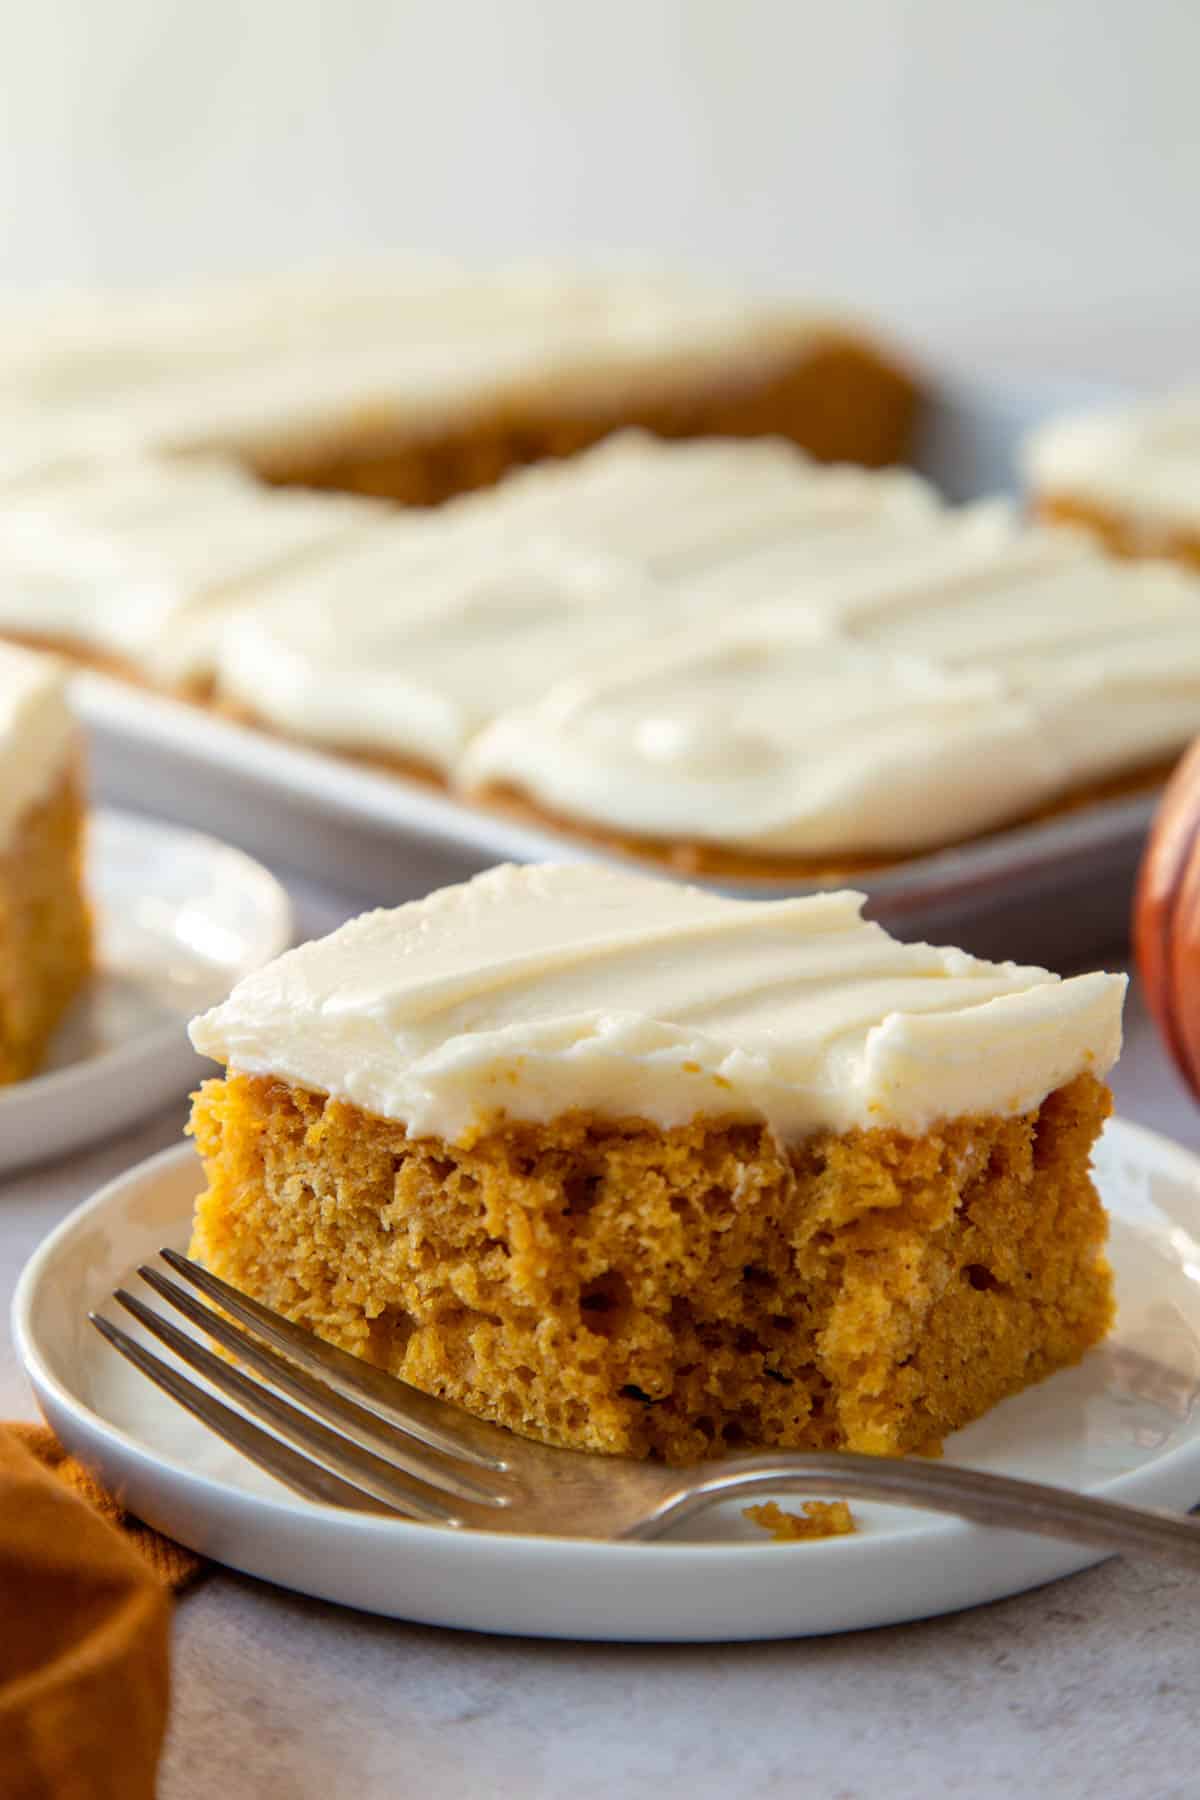 A slice of Pumpkin Bar with Cream Cheese Frosting with a bite removed on a small white plate.